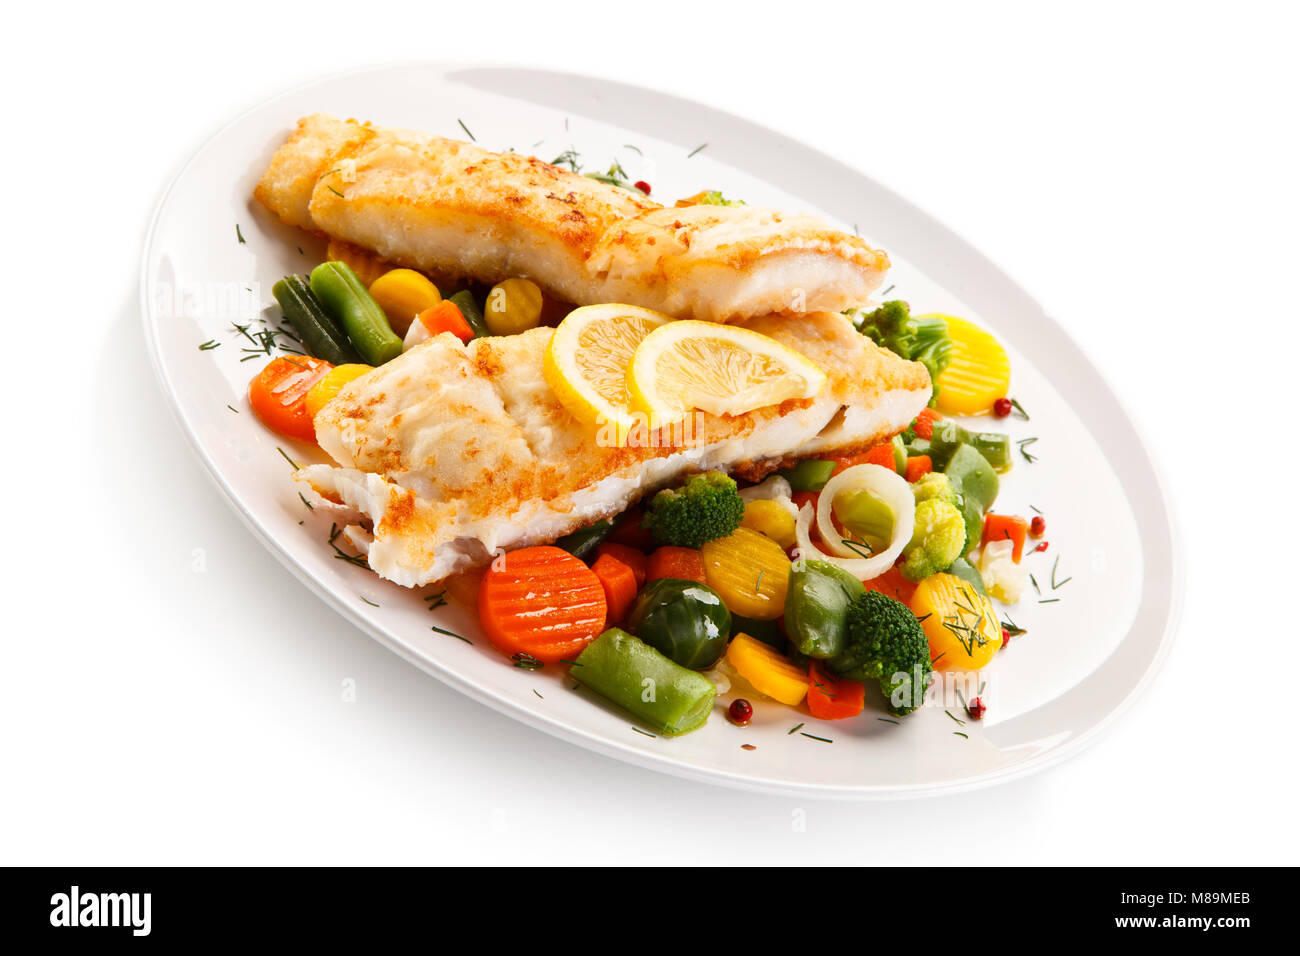 Fish dish - fried fish fillet and vegetables Stock Photo